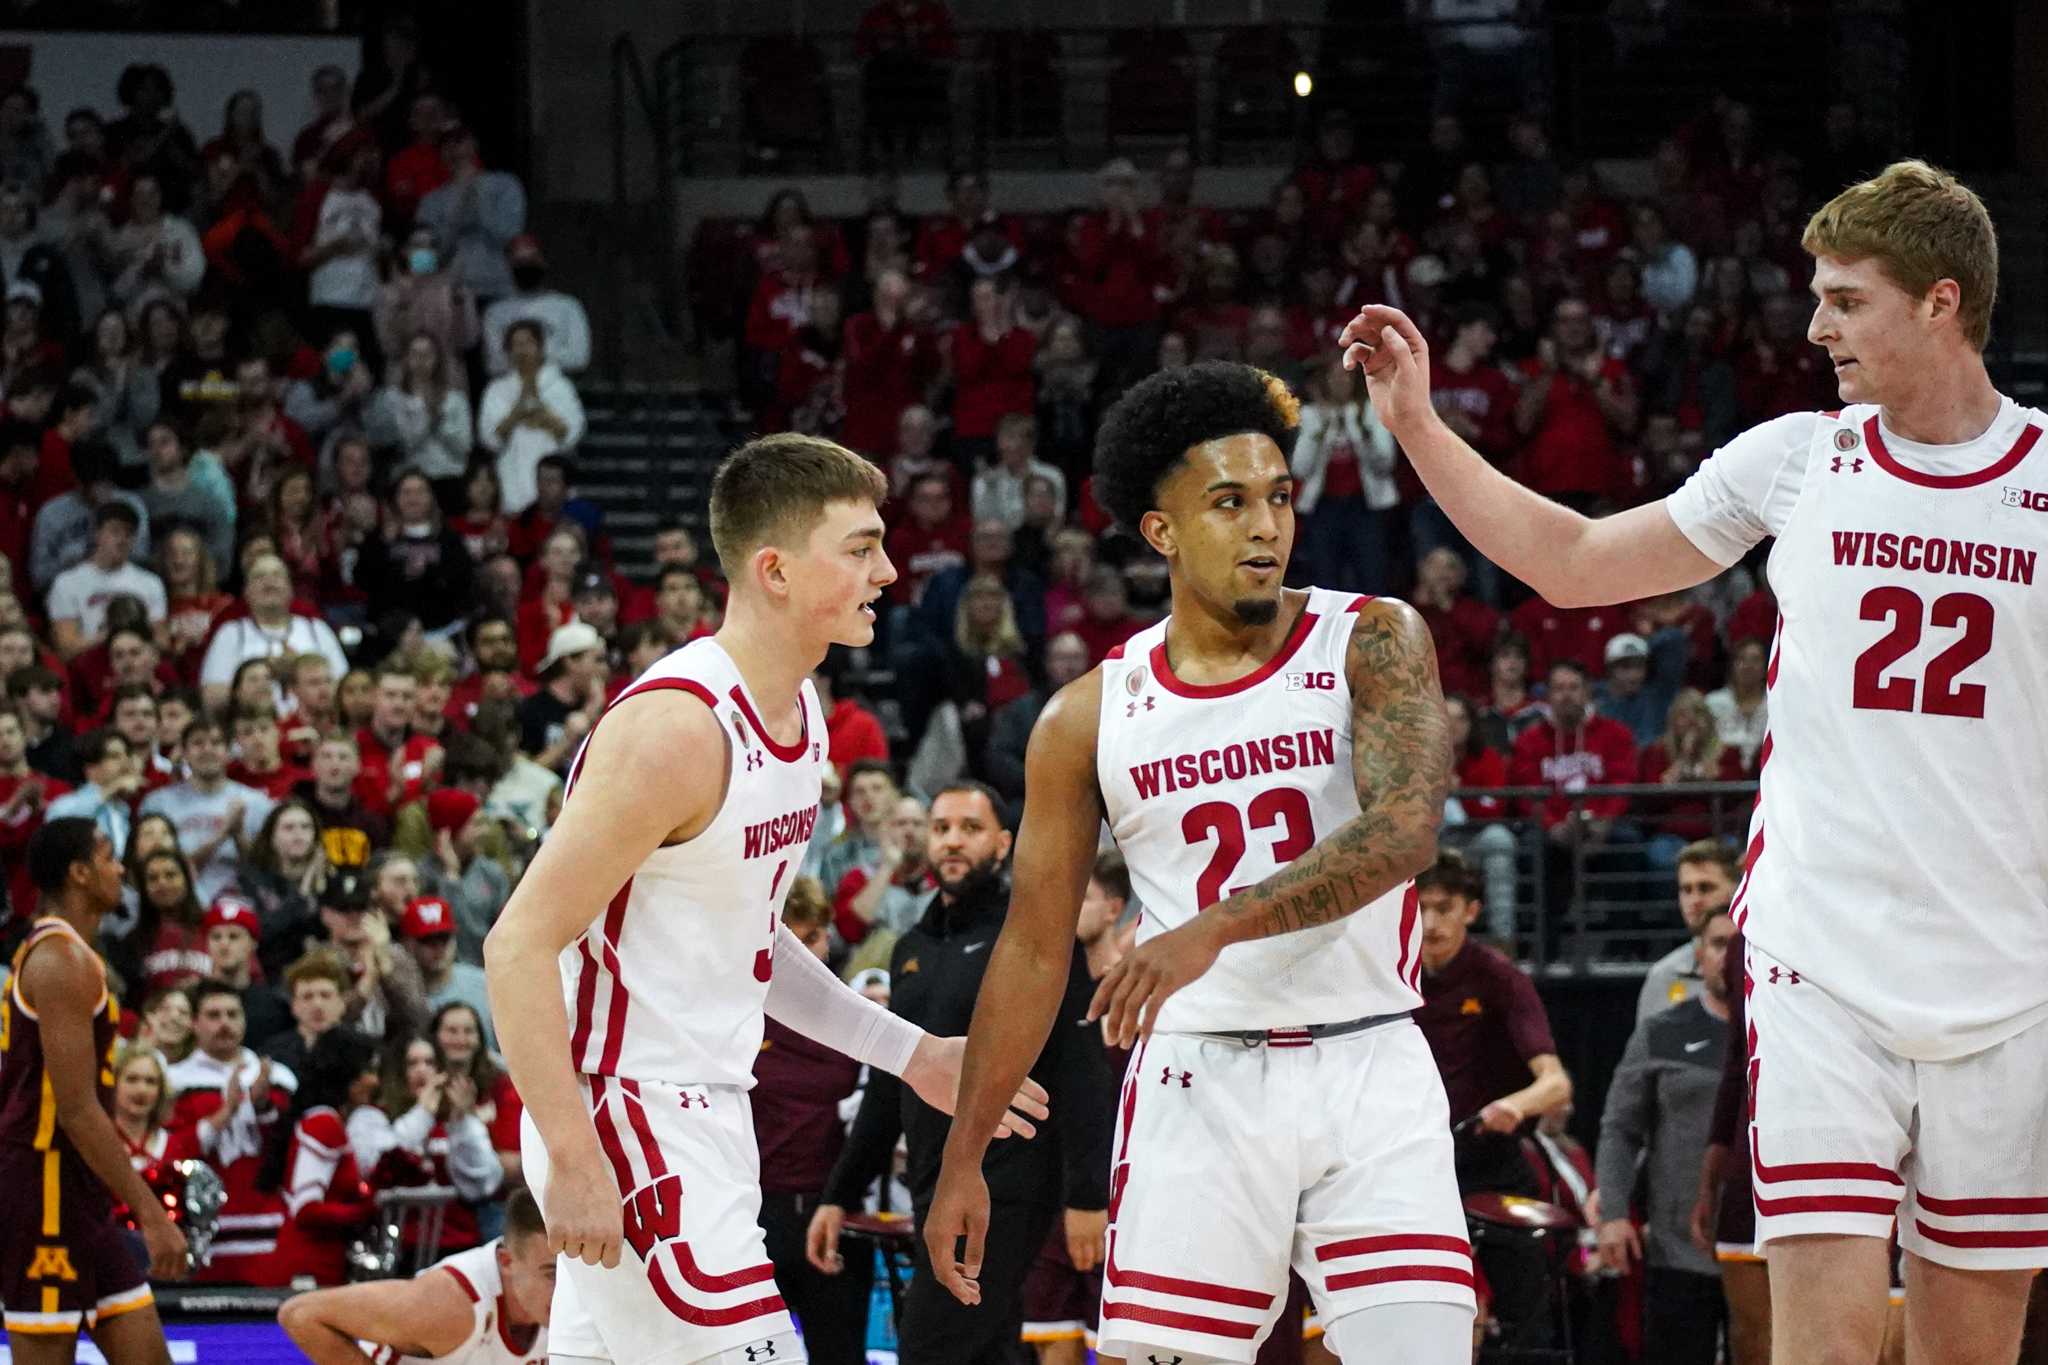 Wisconsin Basketball: Are the Badgers the Team to Beat in the Big